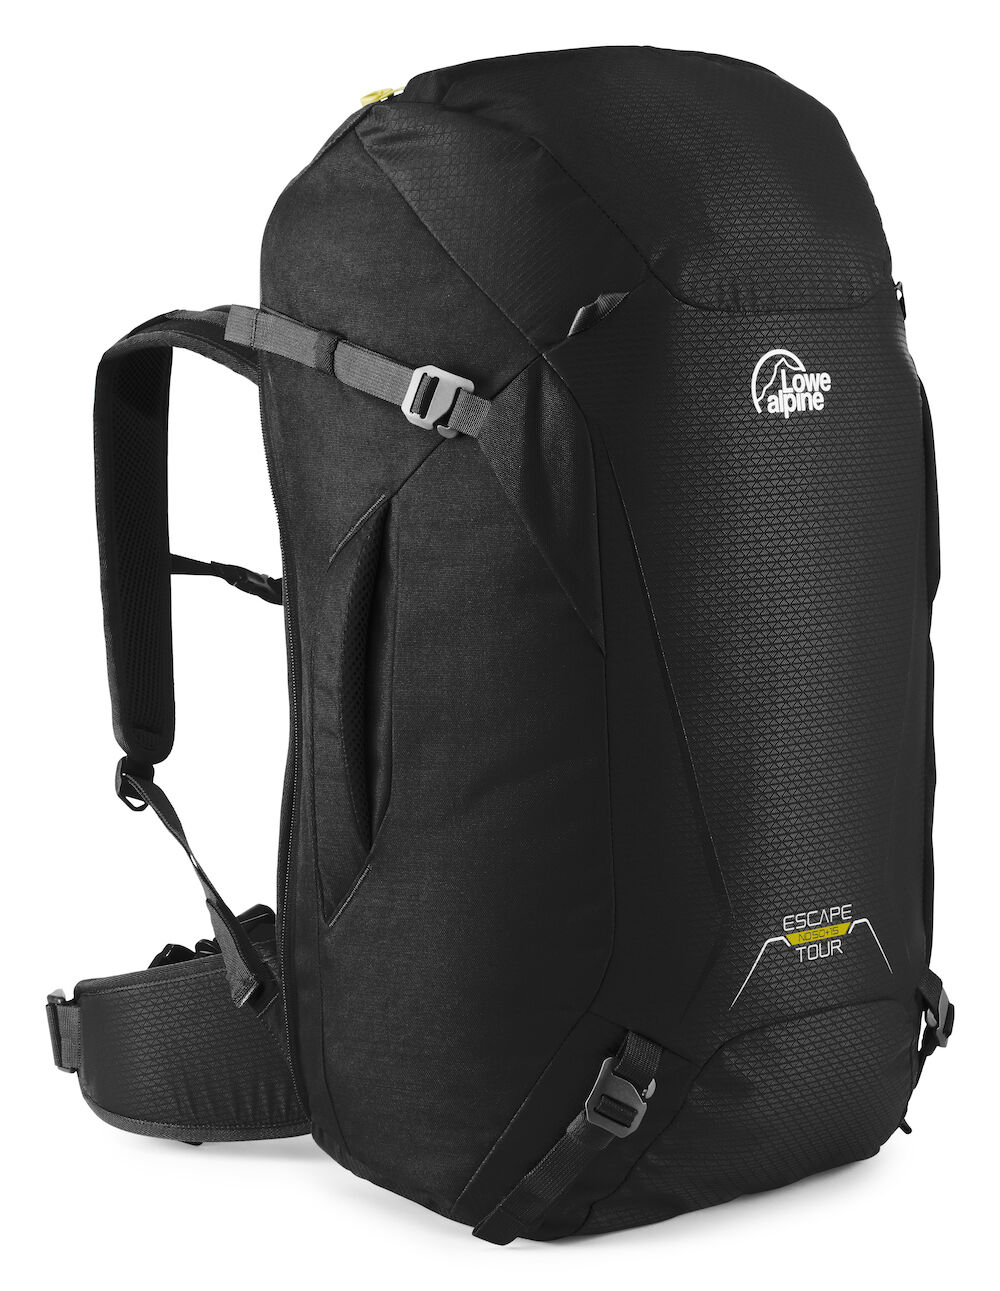 Lowe Alpine Escape Tour ND 50+15 - Hiking backpack - Women's